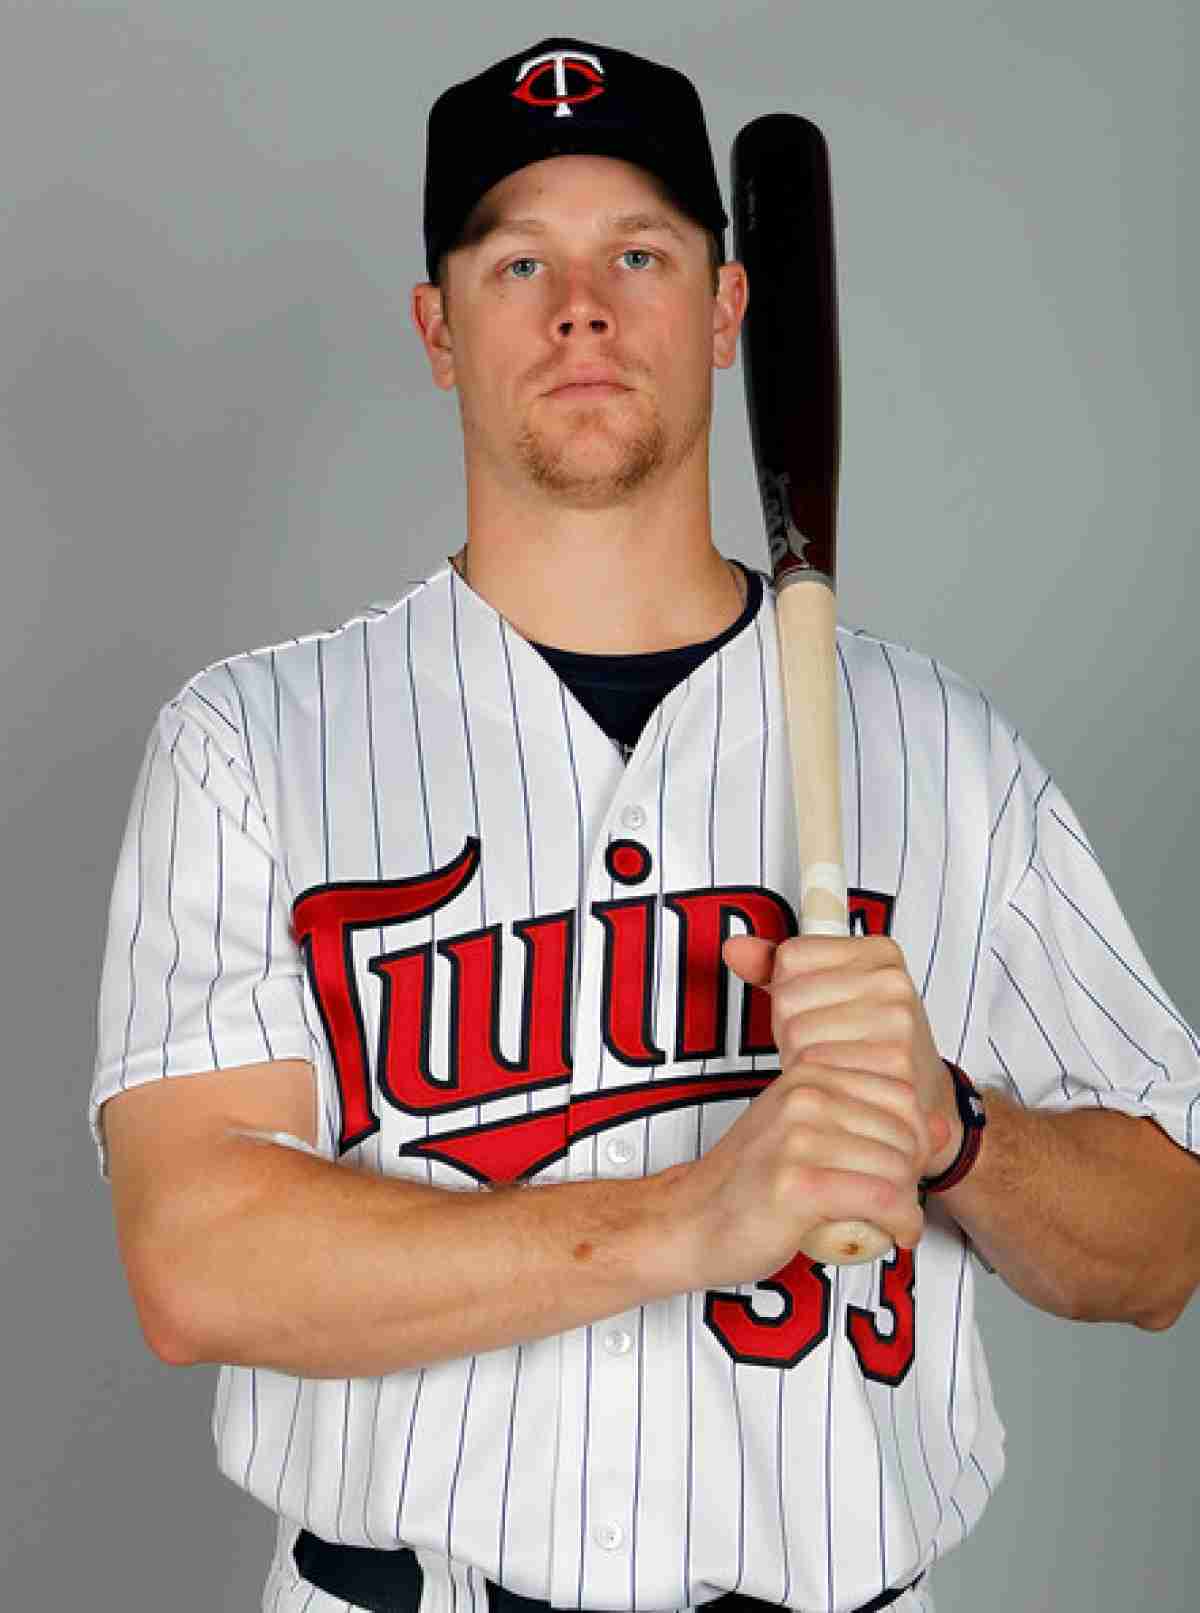 Not in Hall of Fame - 29. Justin Morneau